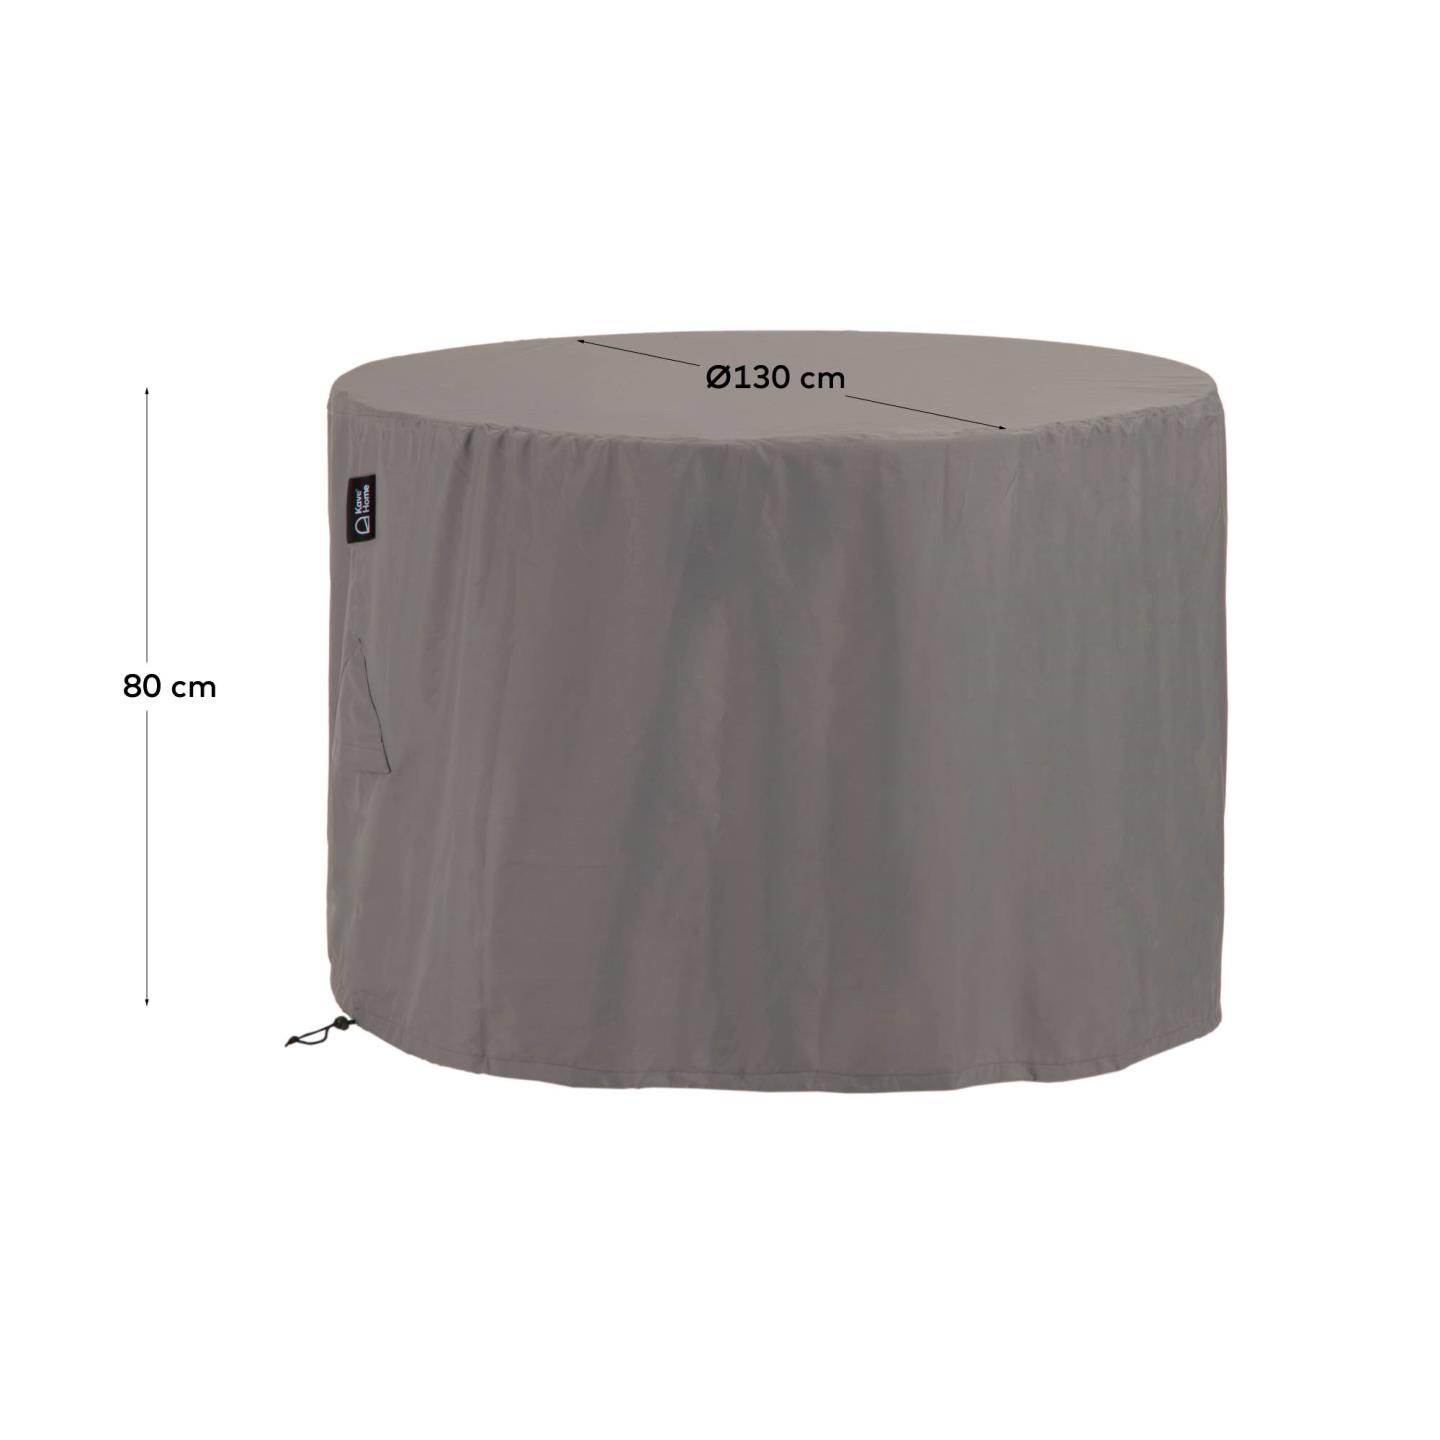 Iria protective cover for round outdoor tables max. 130 x 130 cm - sizes